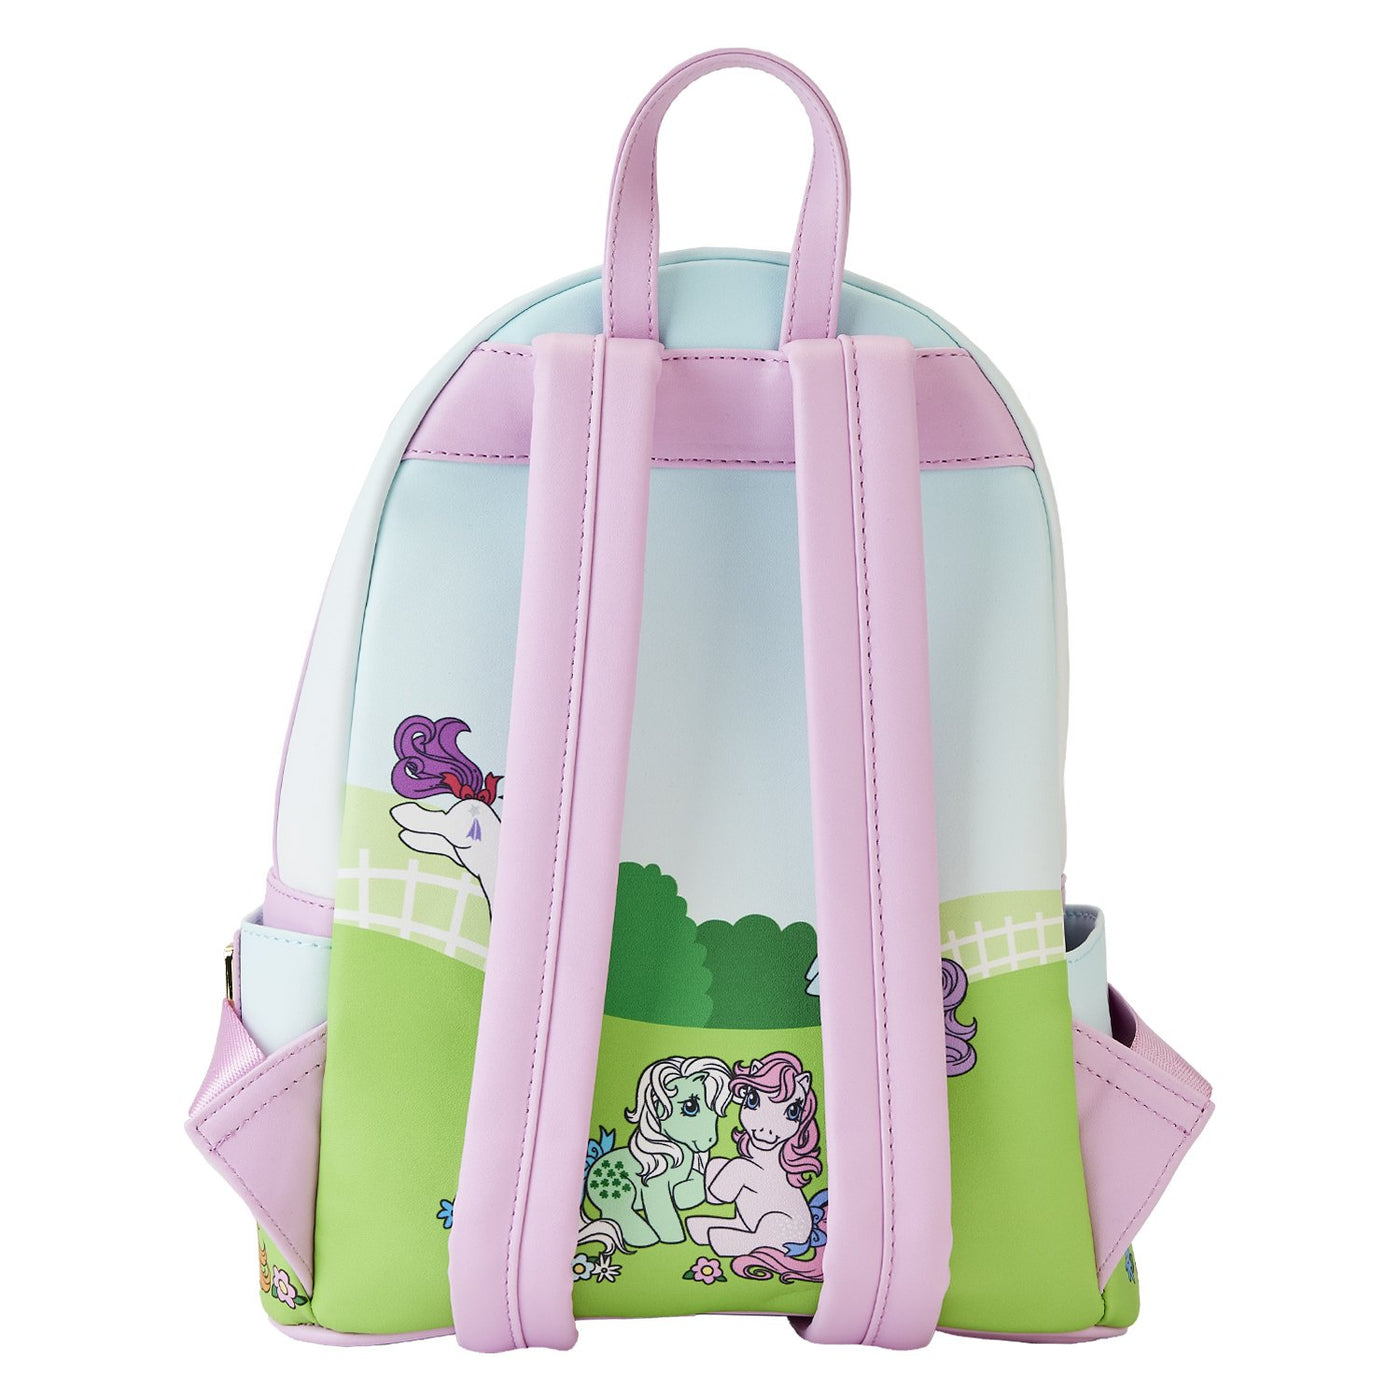 671803456013 - Loungefly Hasbro My Little Pony 40th Anniversary Stable Mini Backpack - Back